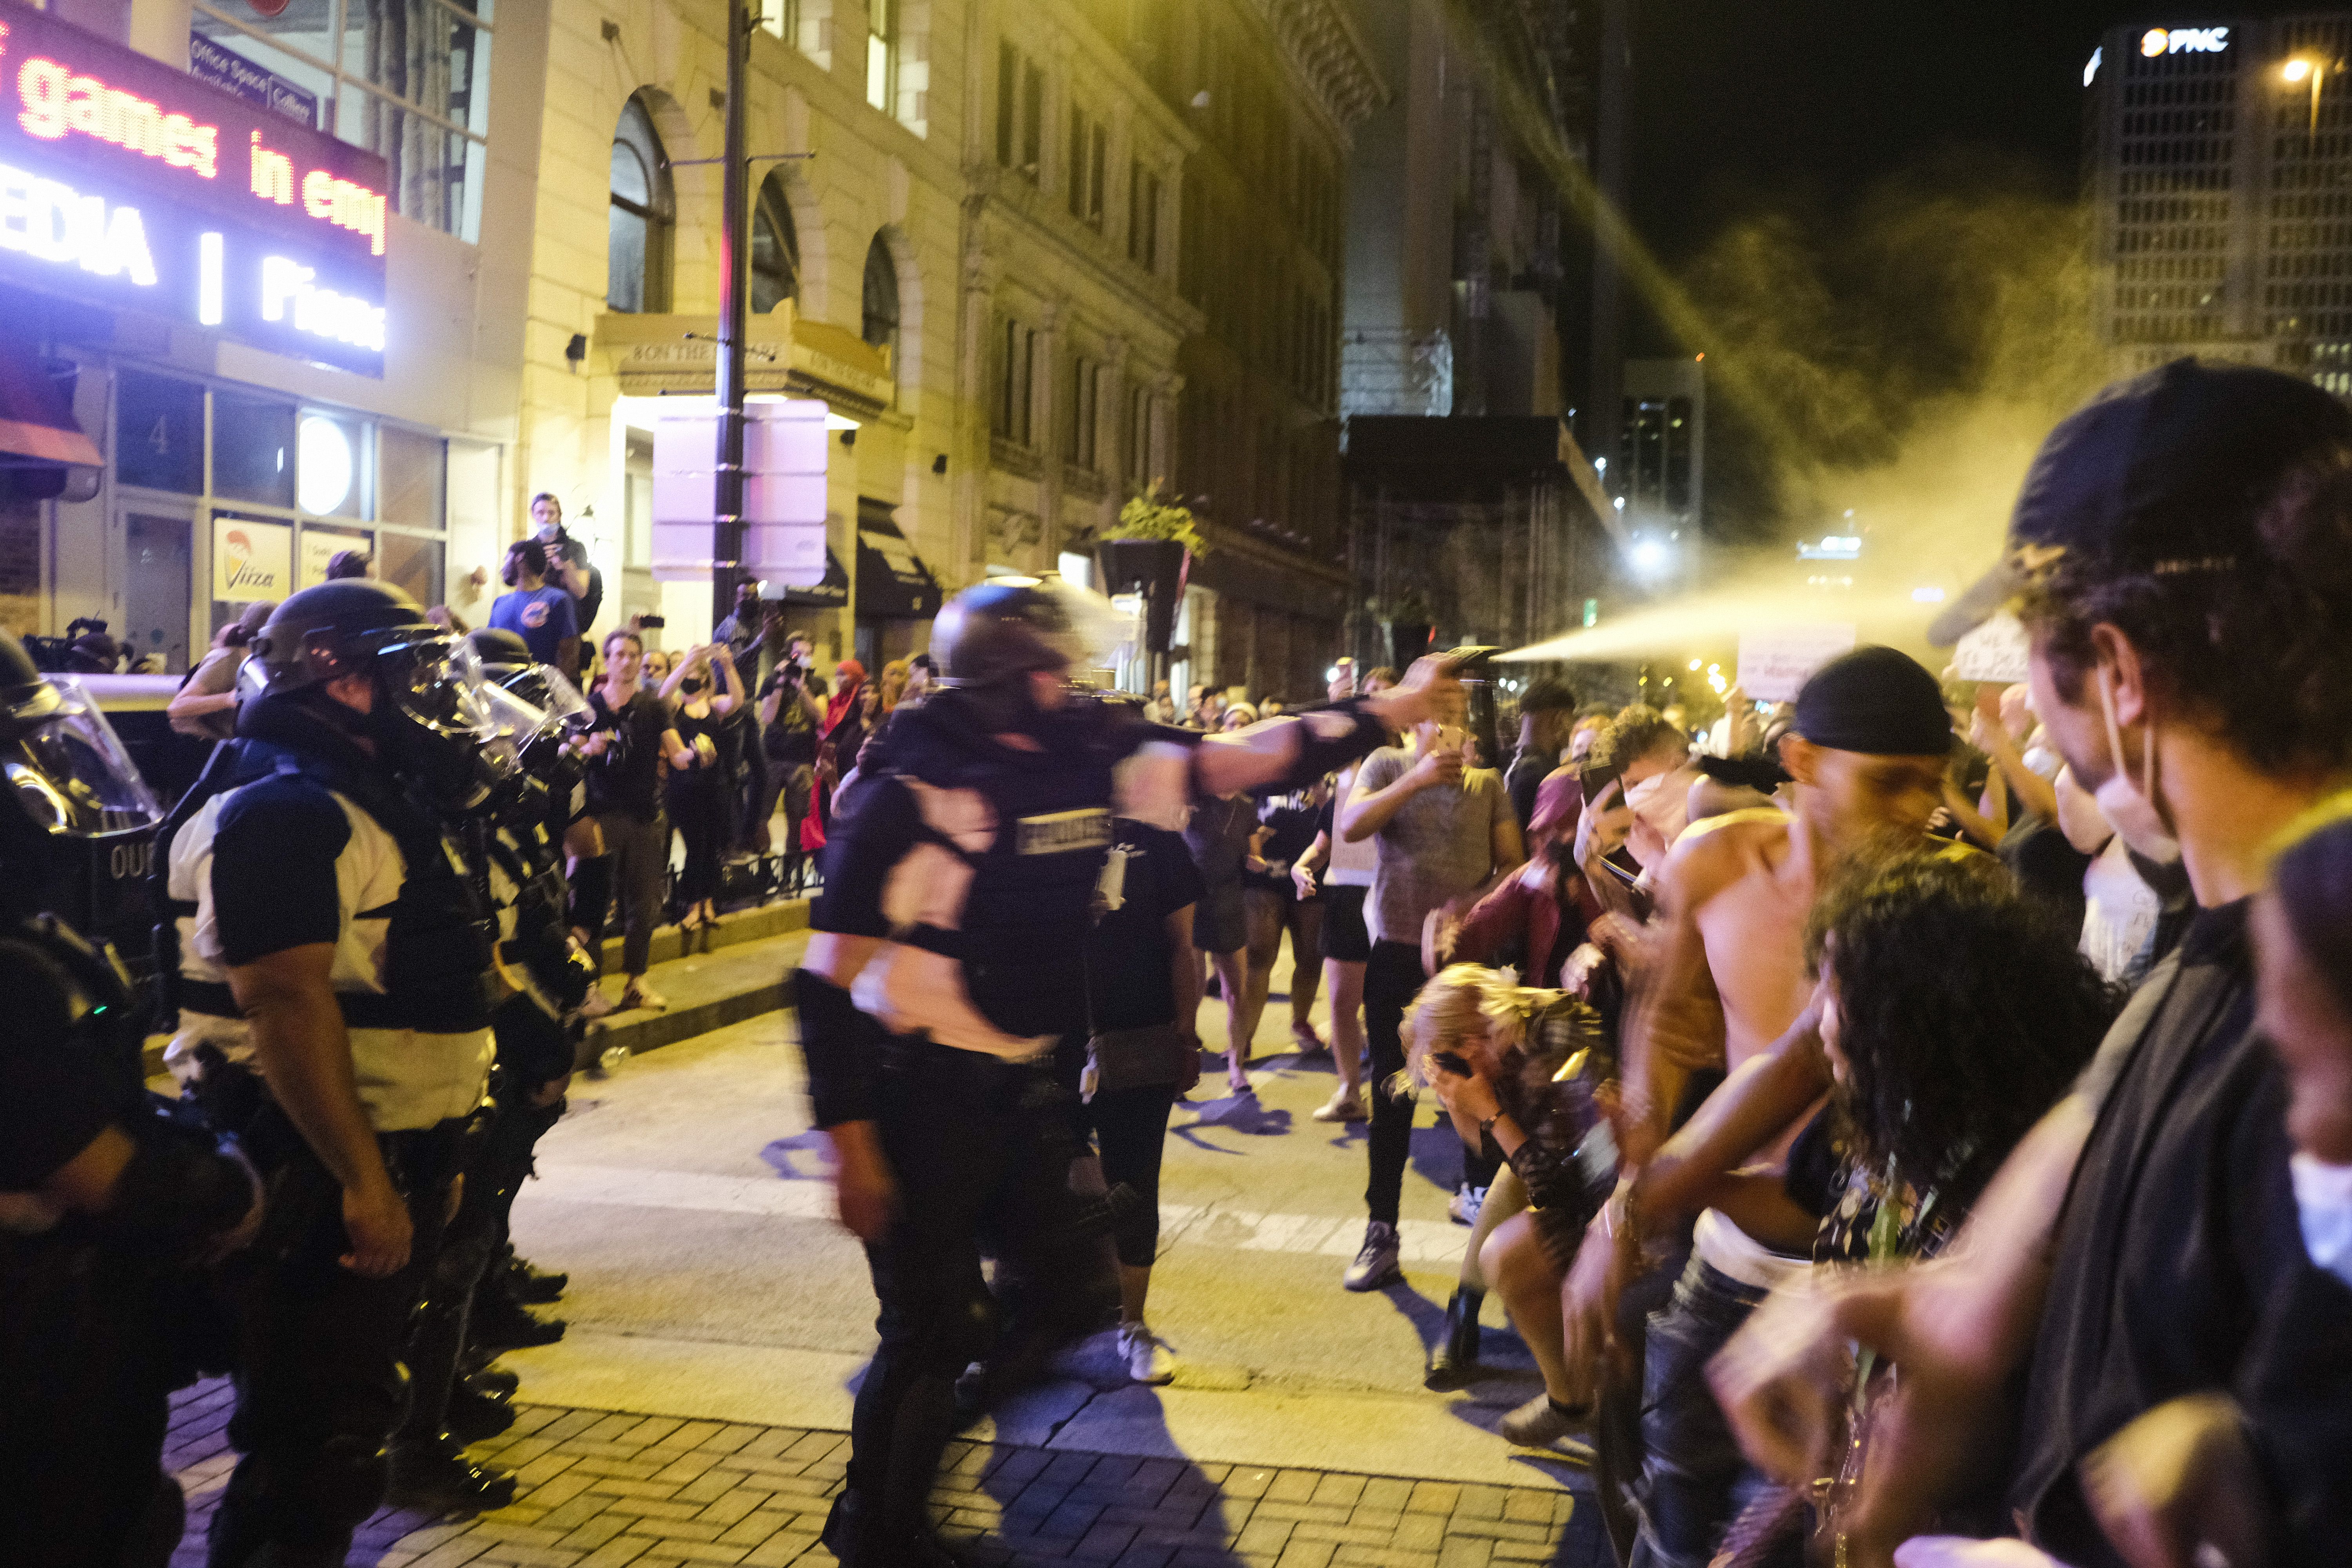 Columbus police officers clash with protestors on a street, with an officer spraying something into a row of people. 